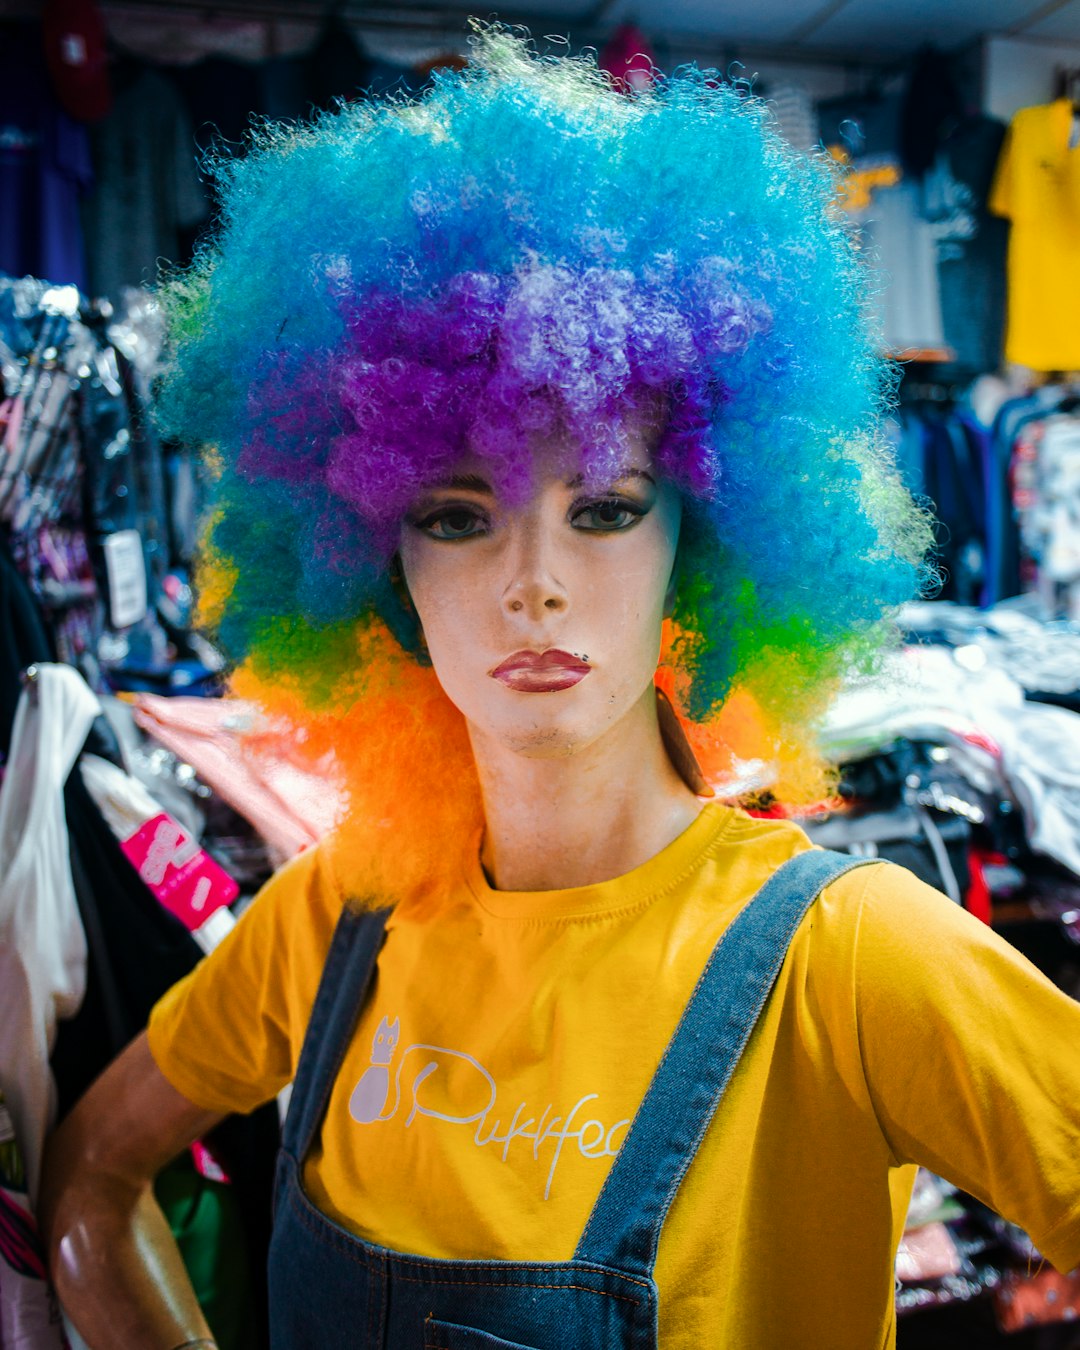 woman in purple wig and yellow shirt